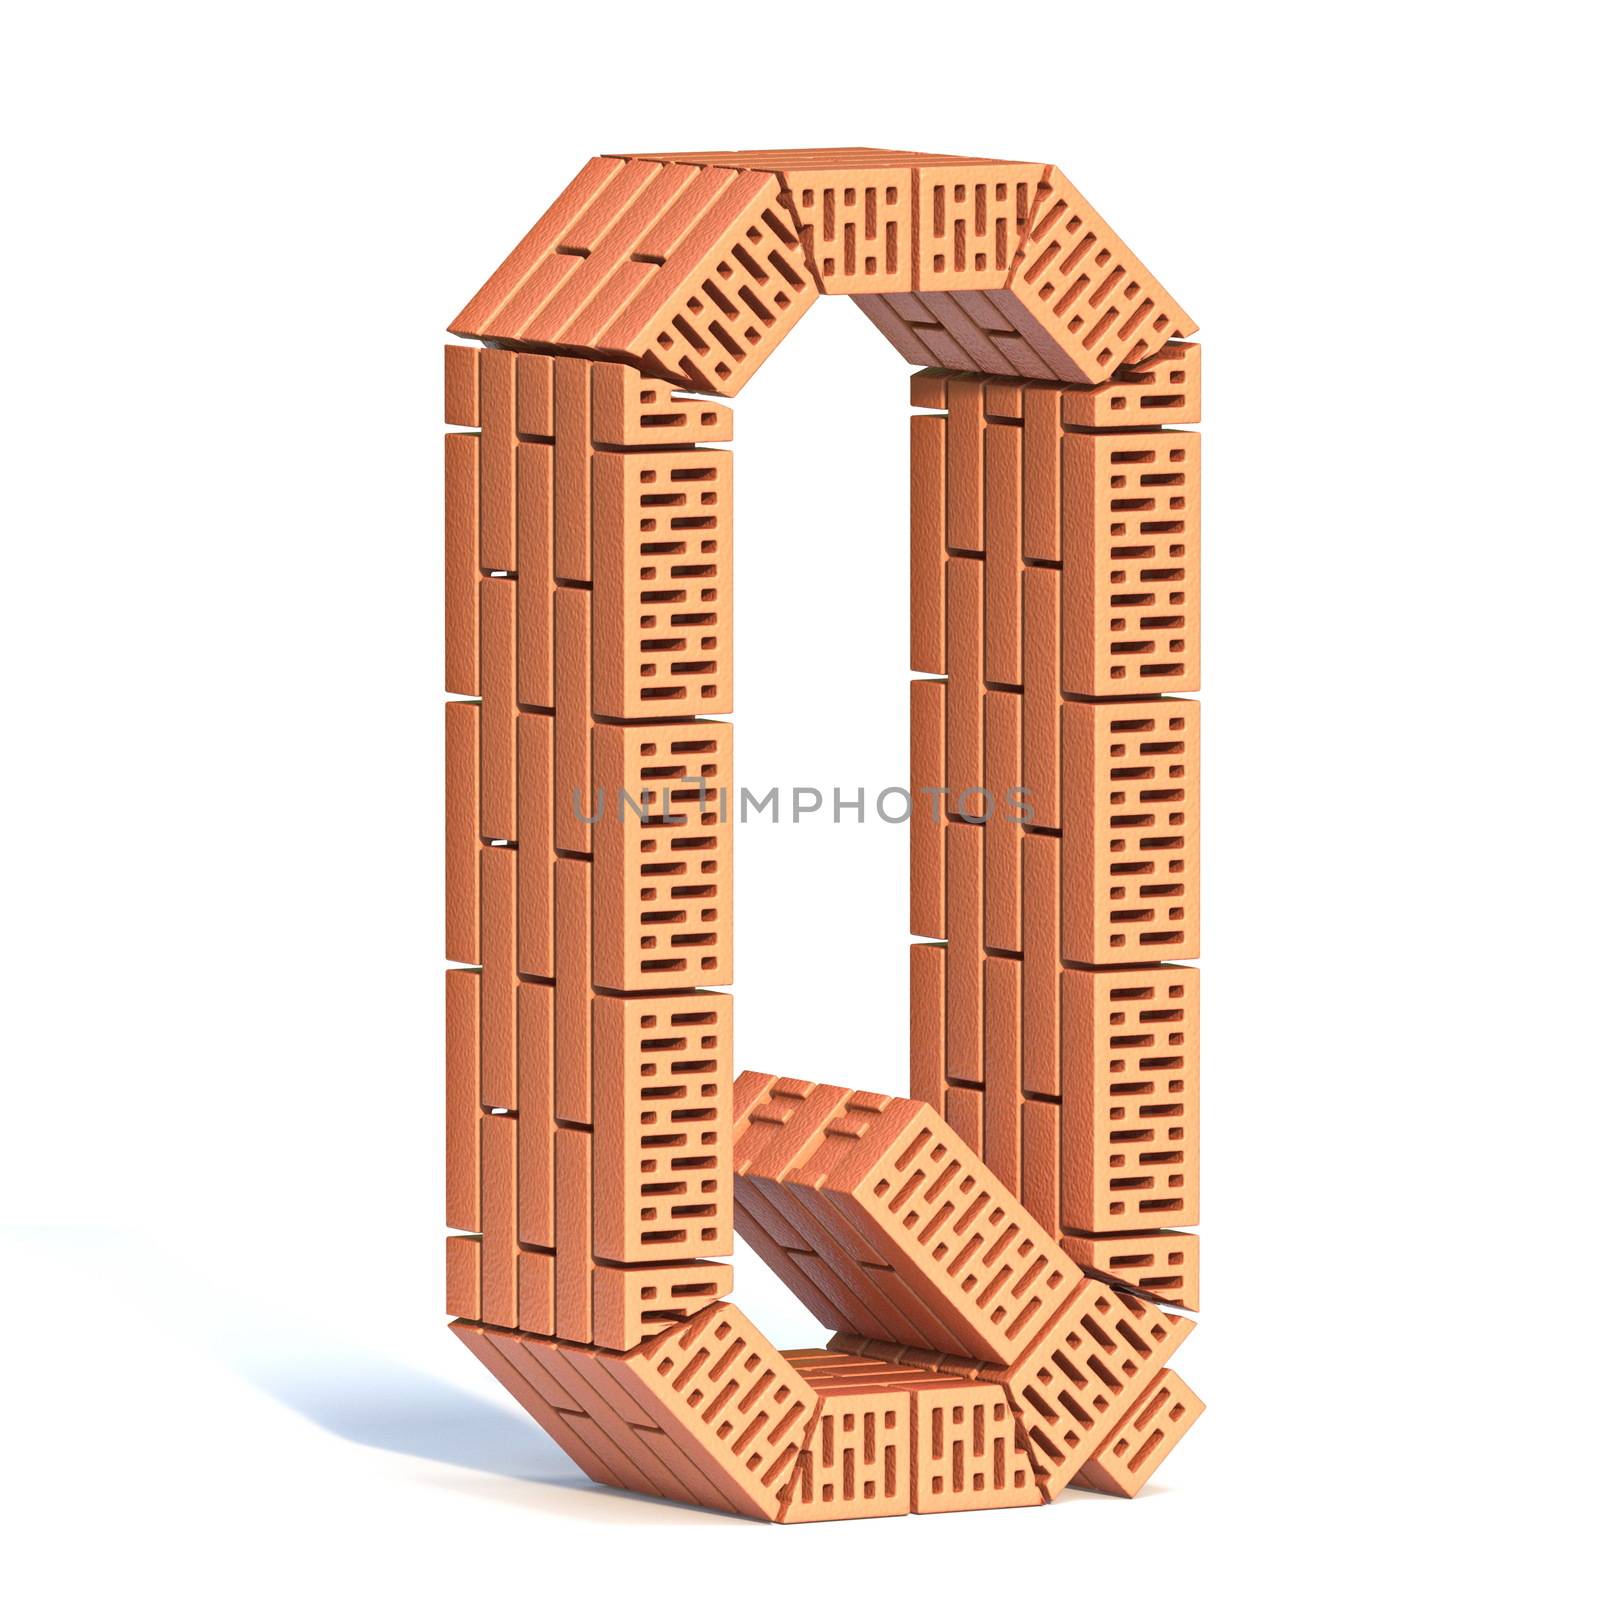 Brick wall font Letter Q 3D render illustration isolated on white background